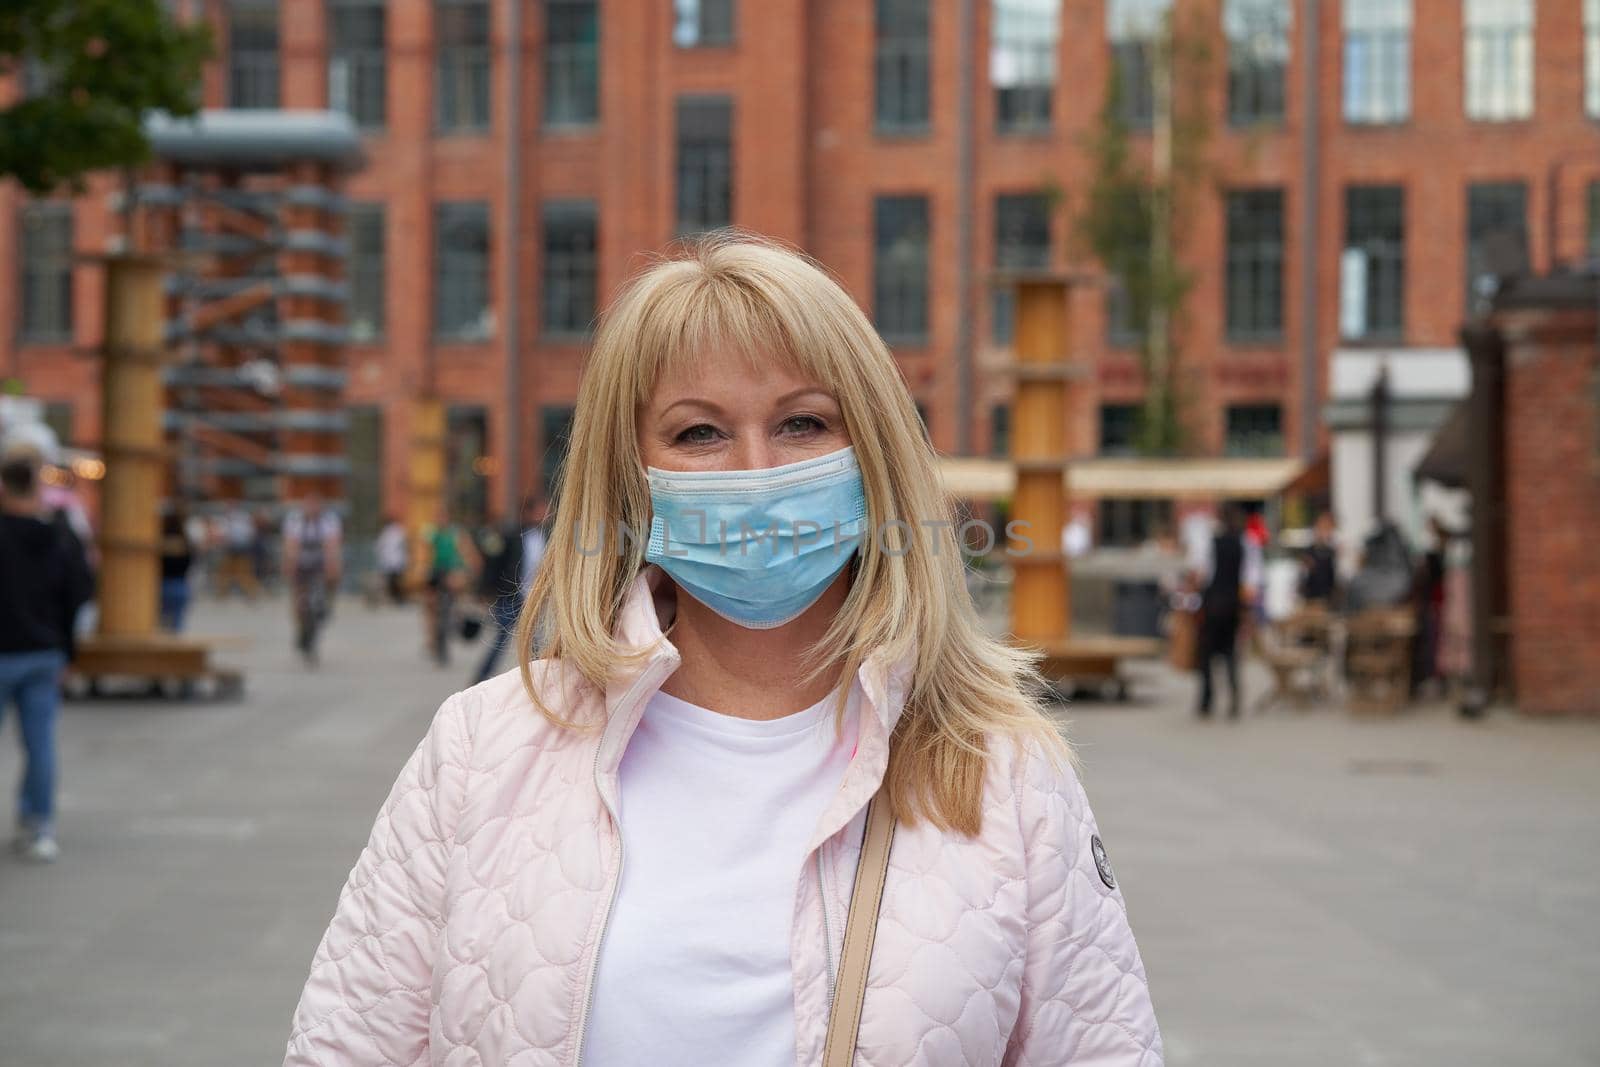 Woman in protective medical face mask standing outside in public place by NataBene